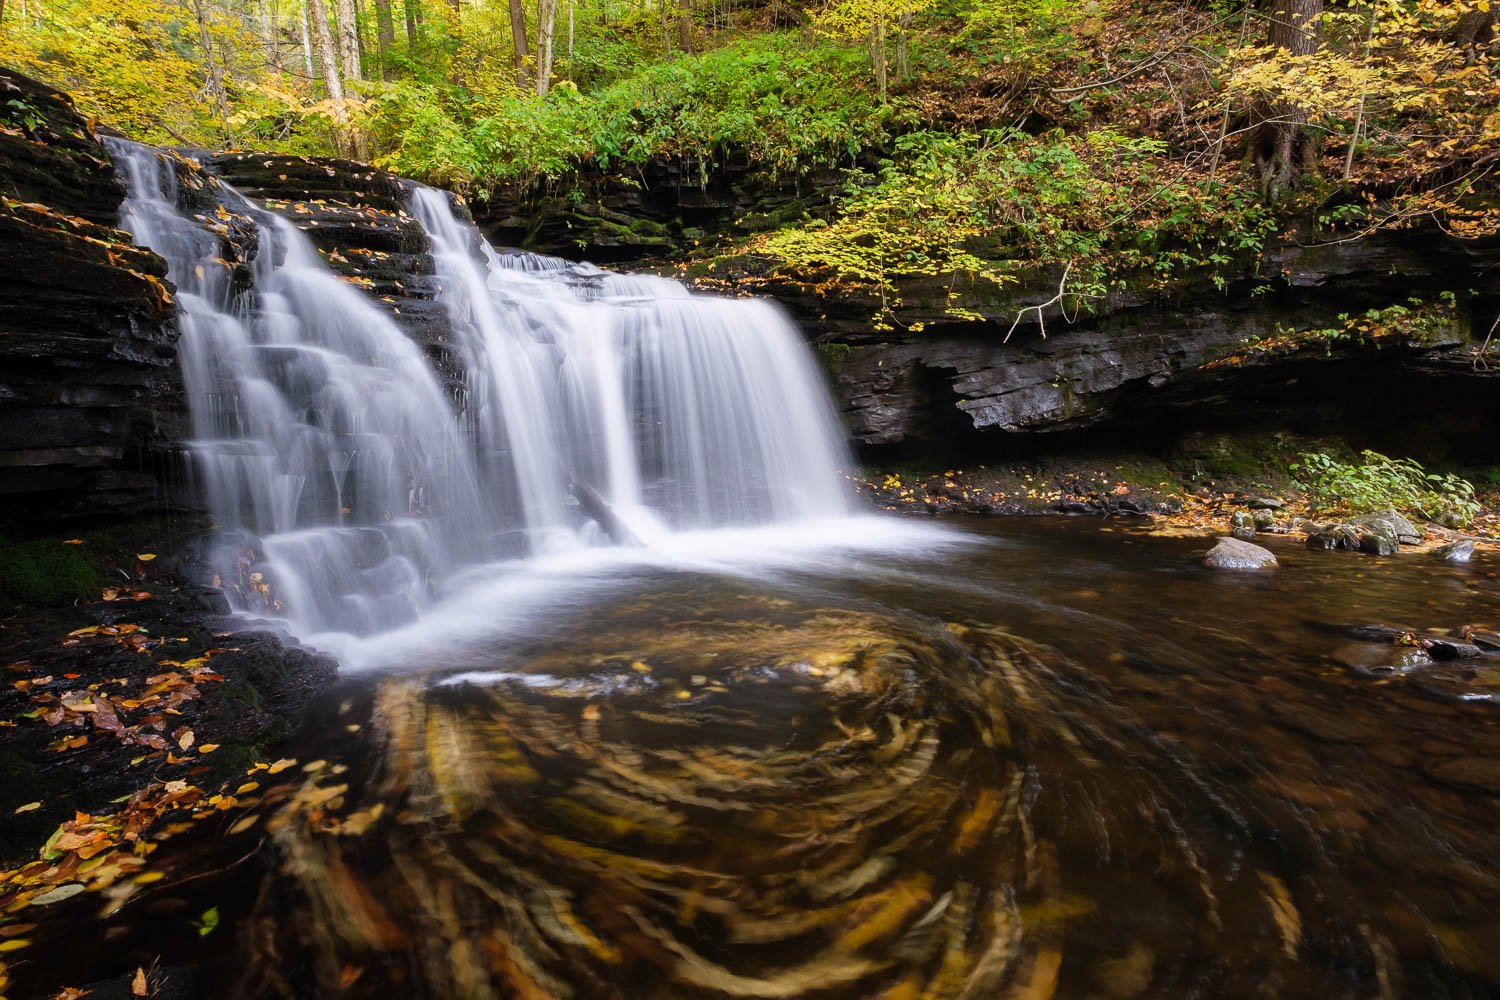  Autumn leaves swirling in an eddy on a lovely photo road trip throughout the Northeast. Ricketts Glen, PA, October. 